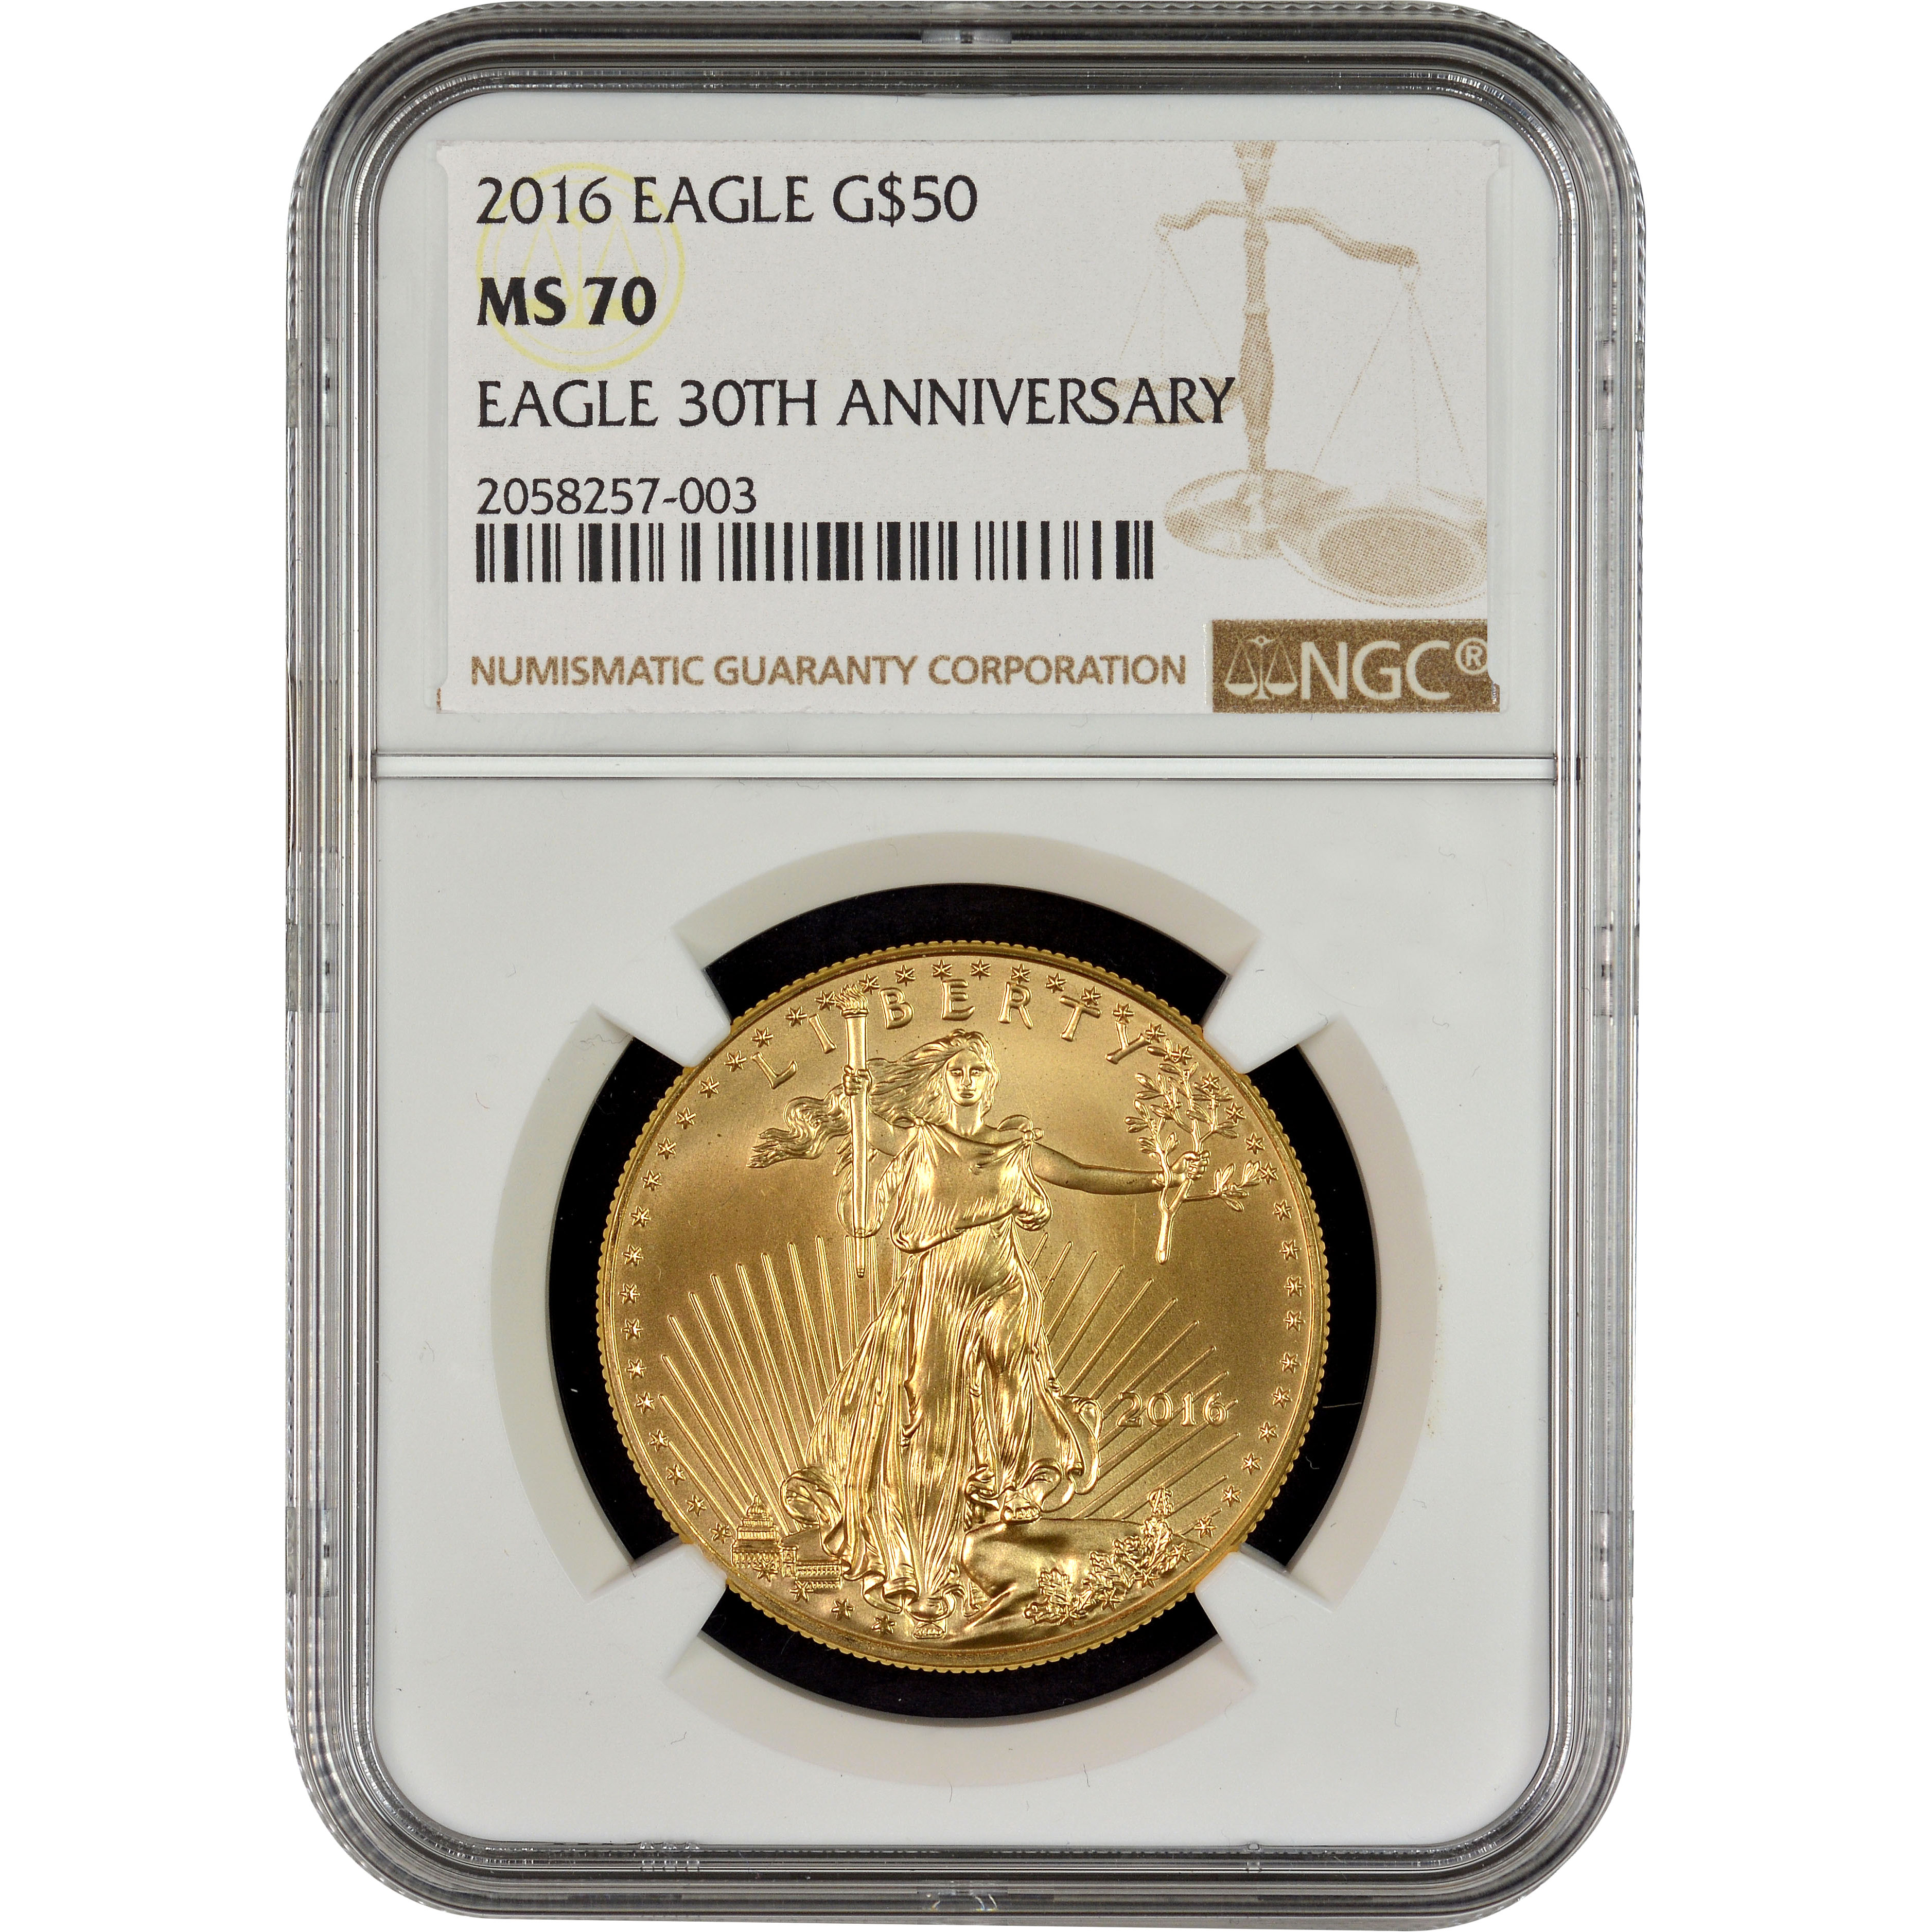 Compare 2016 American Eagle 1 oz Gold Coin - NGC MS-70 dealer prices